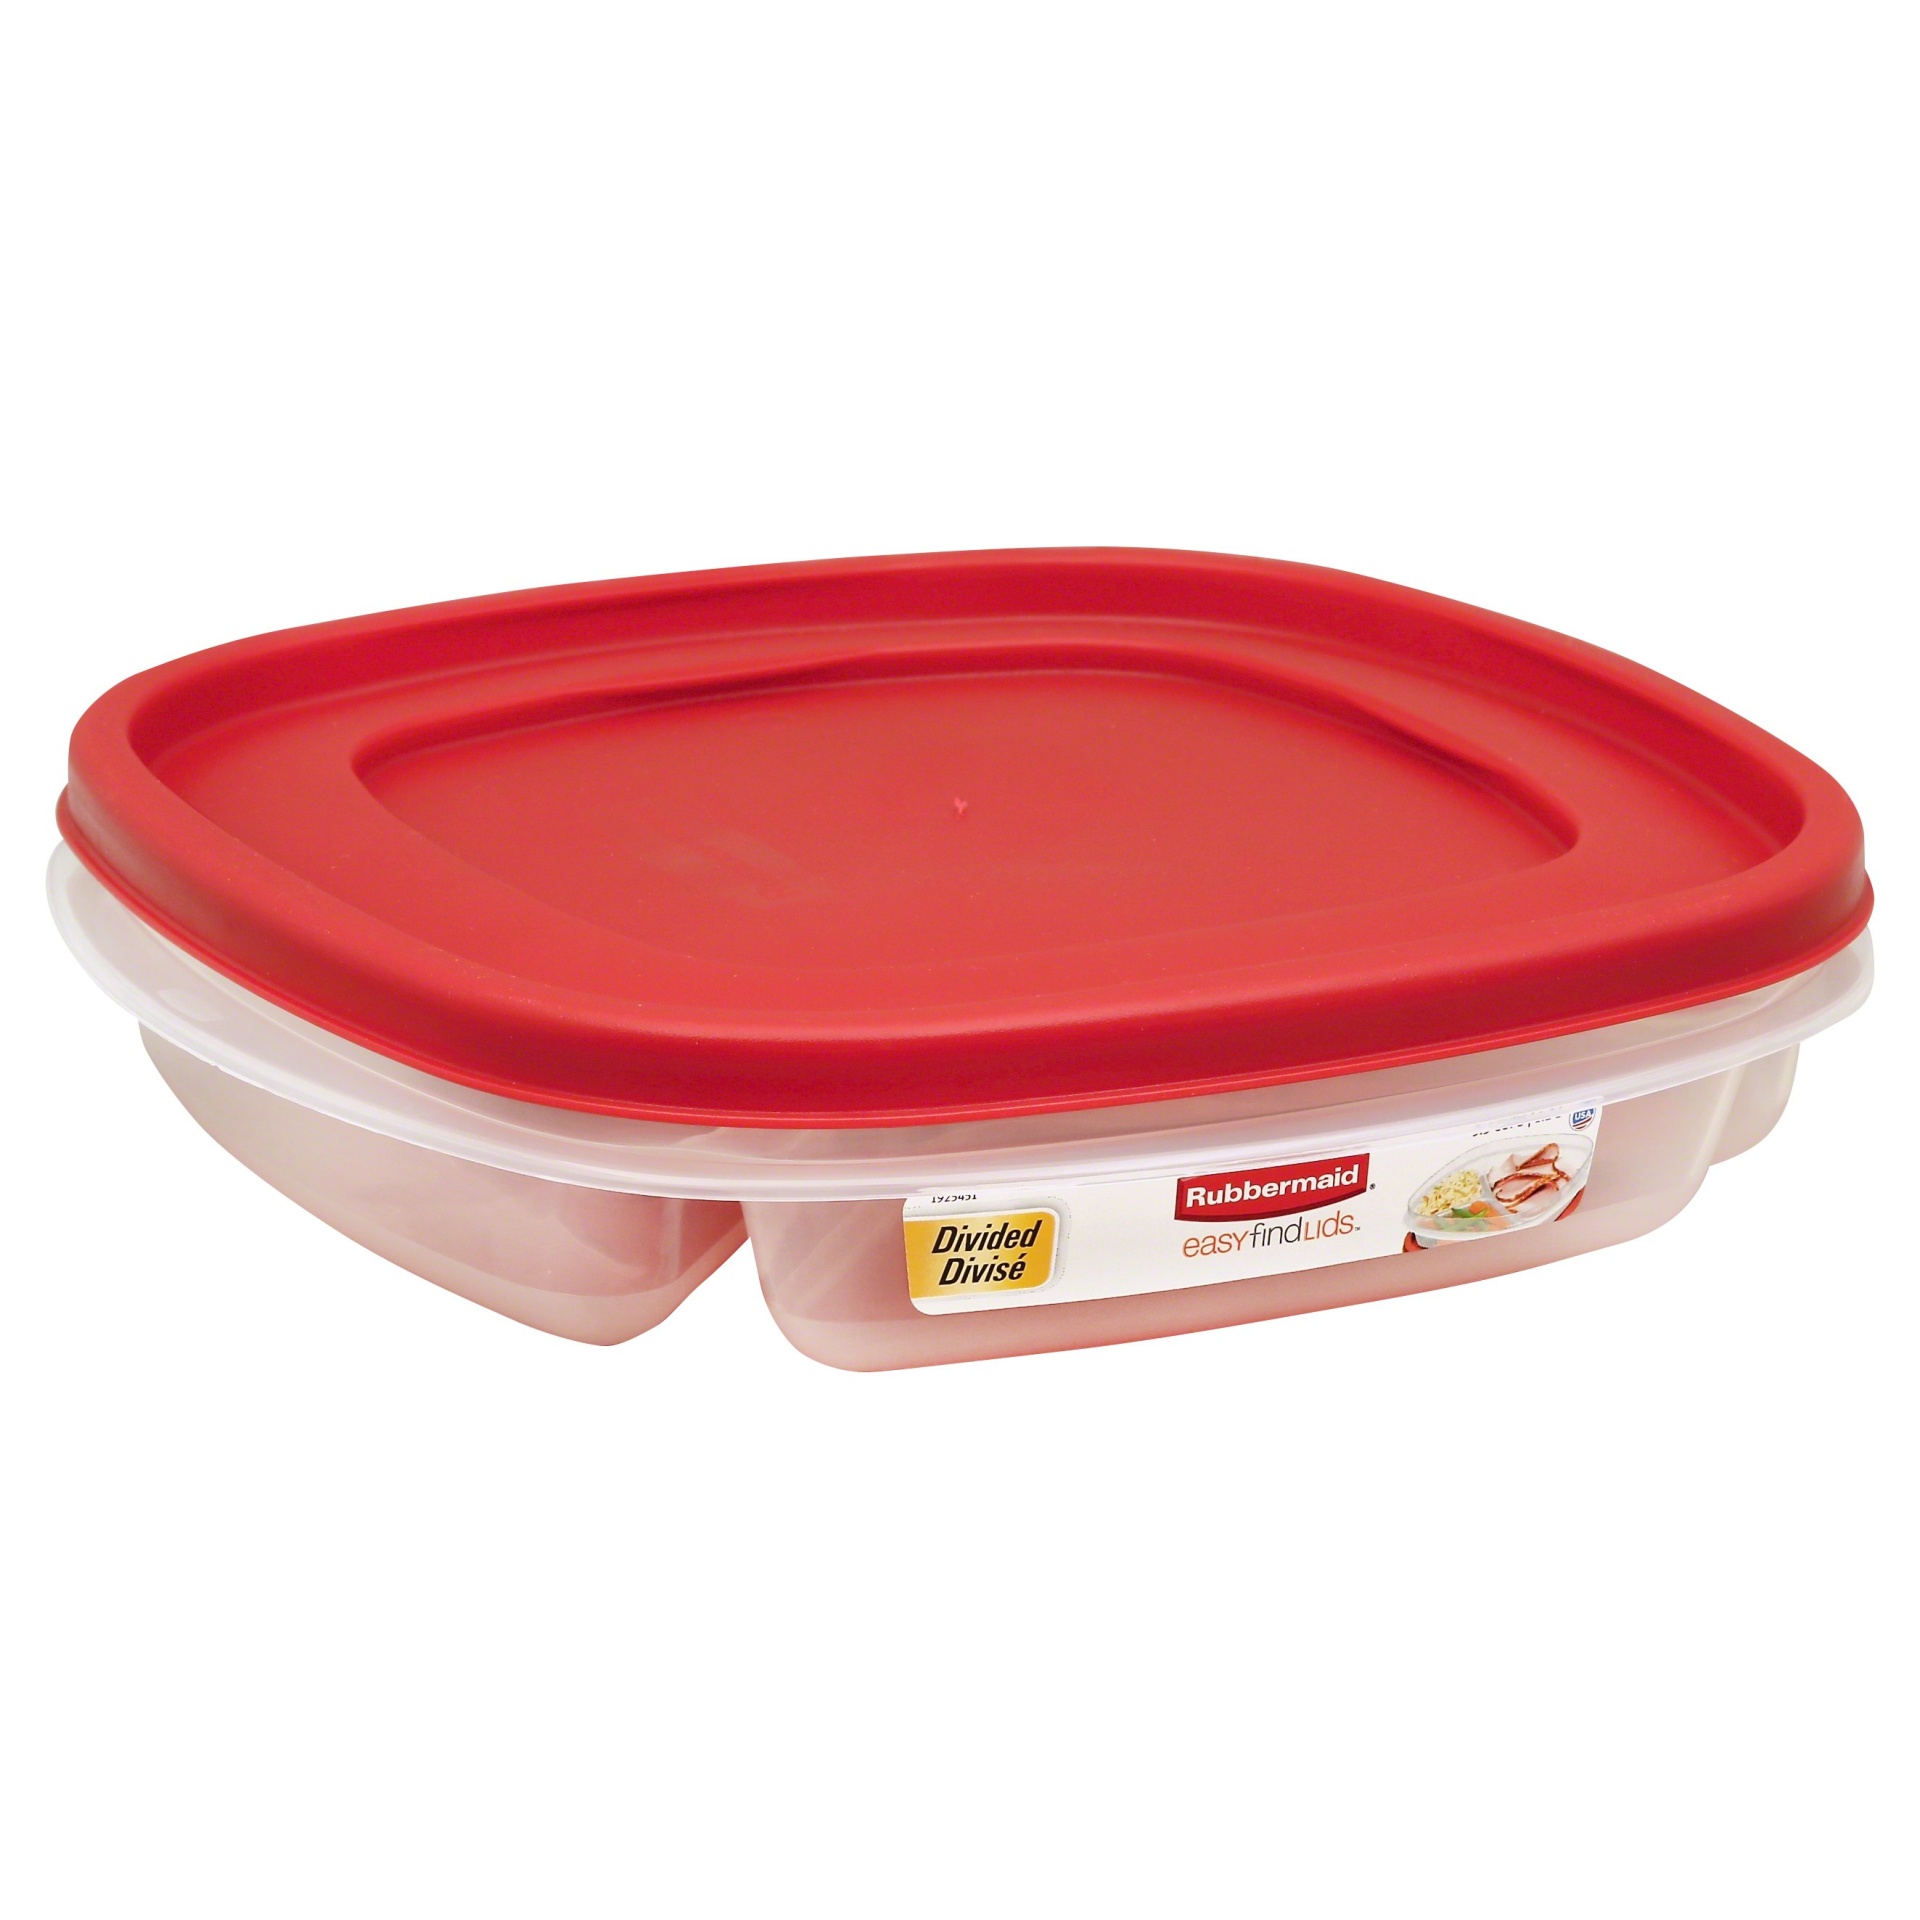 Rubbermaid Divided Easy Find Lids Food Storage Container 4.8 cup